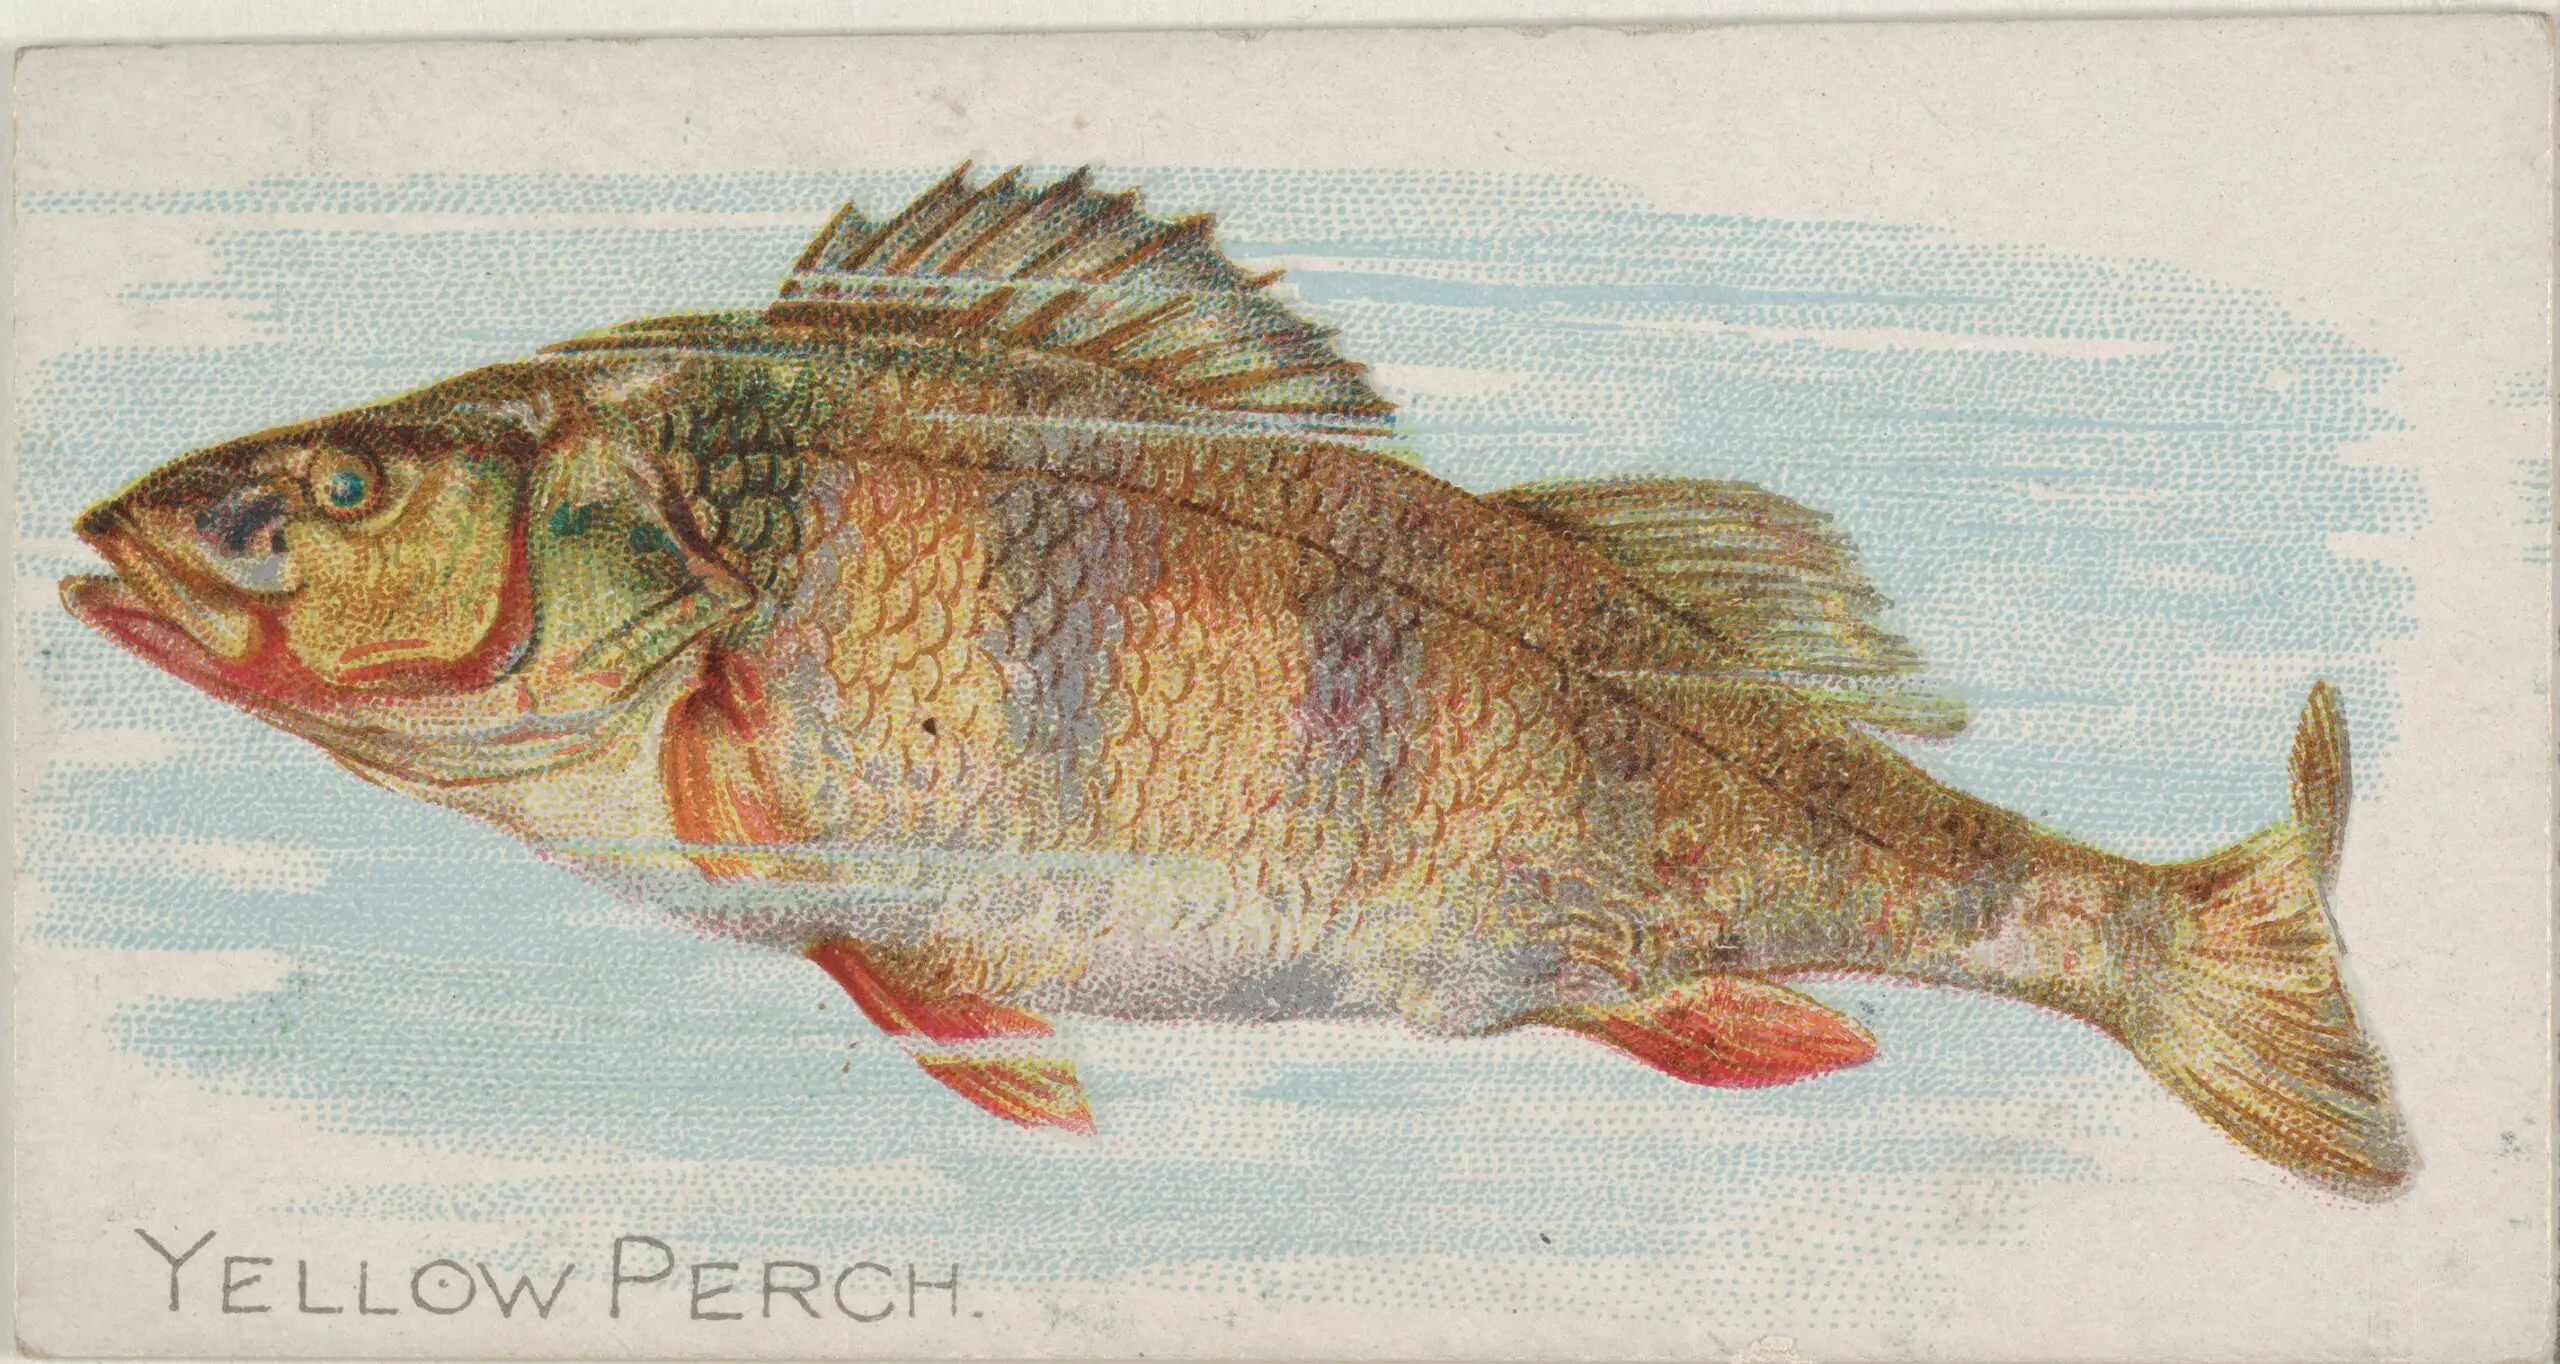 Yellow Perch, from the Fish from American Waters series (N8) for Allen & Ginter Cigarettes Brands